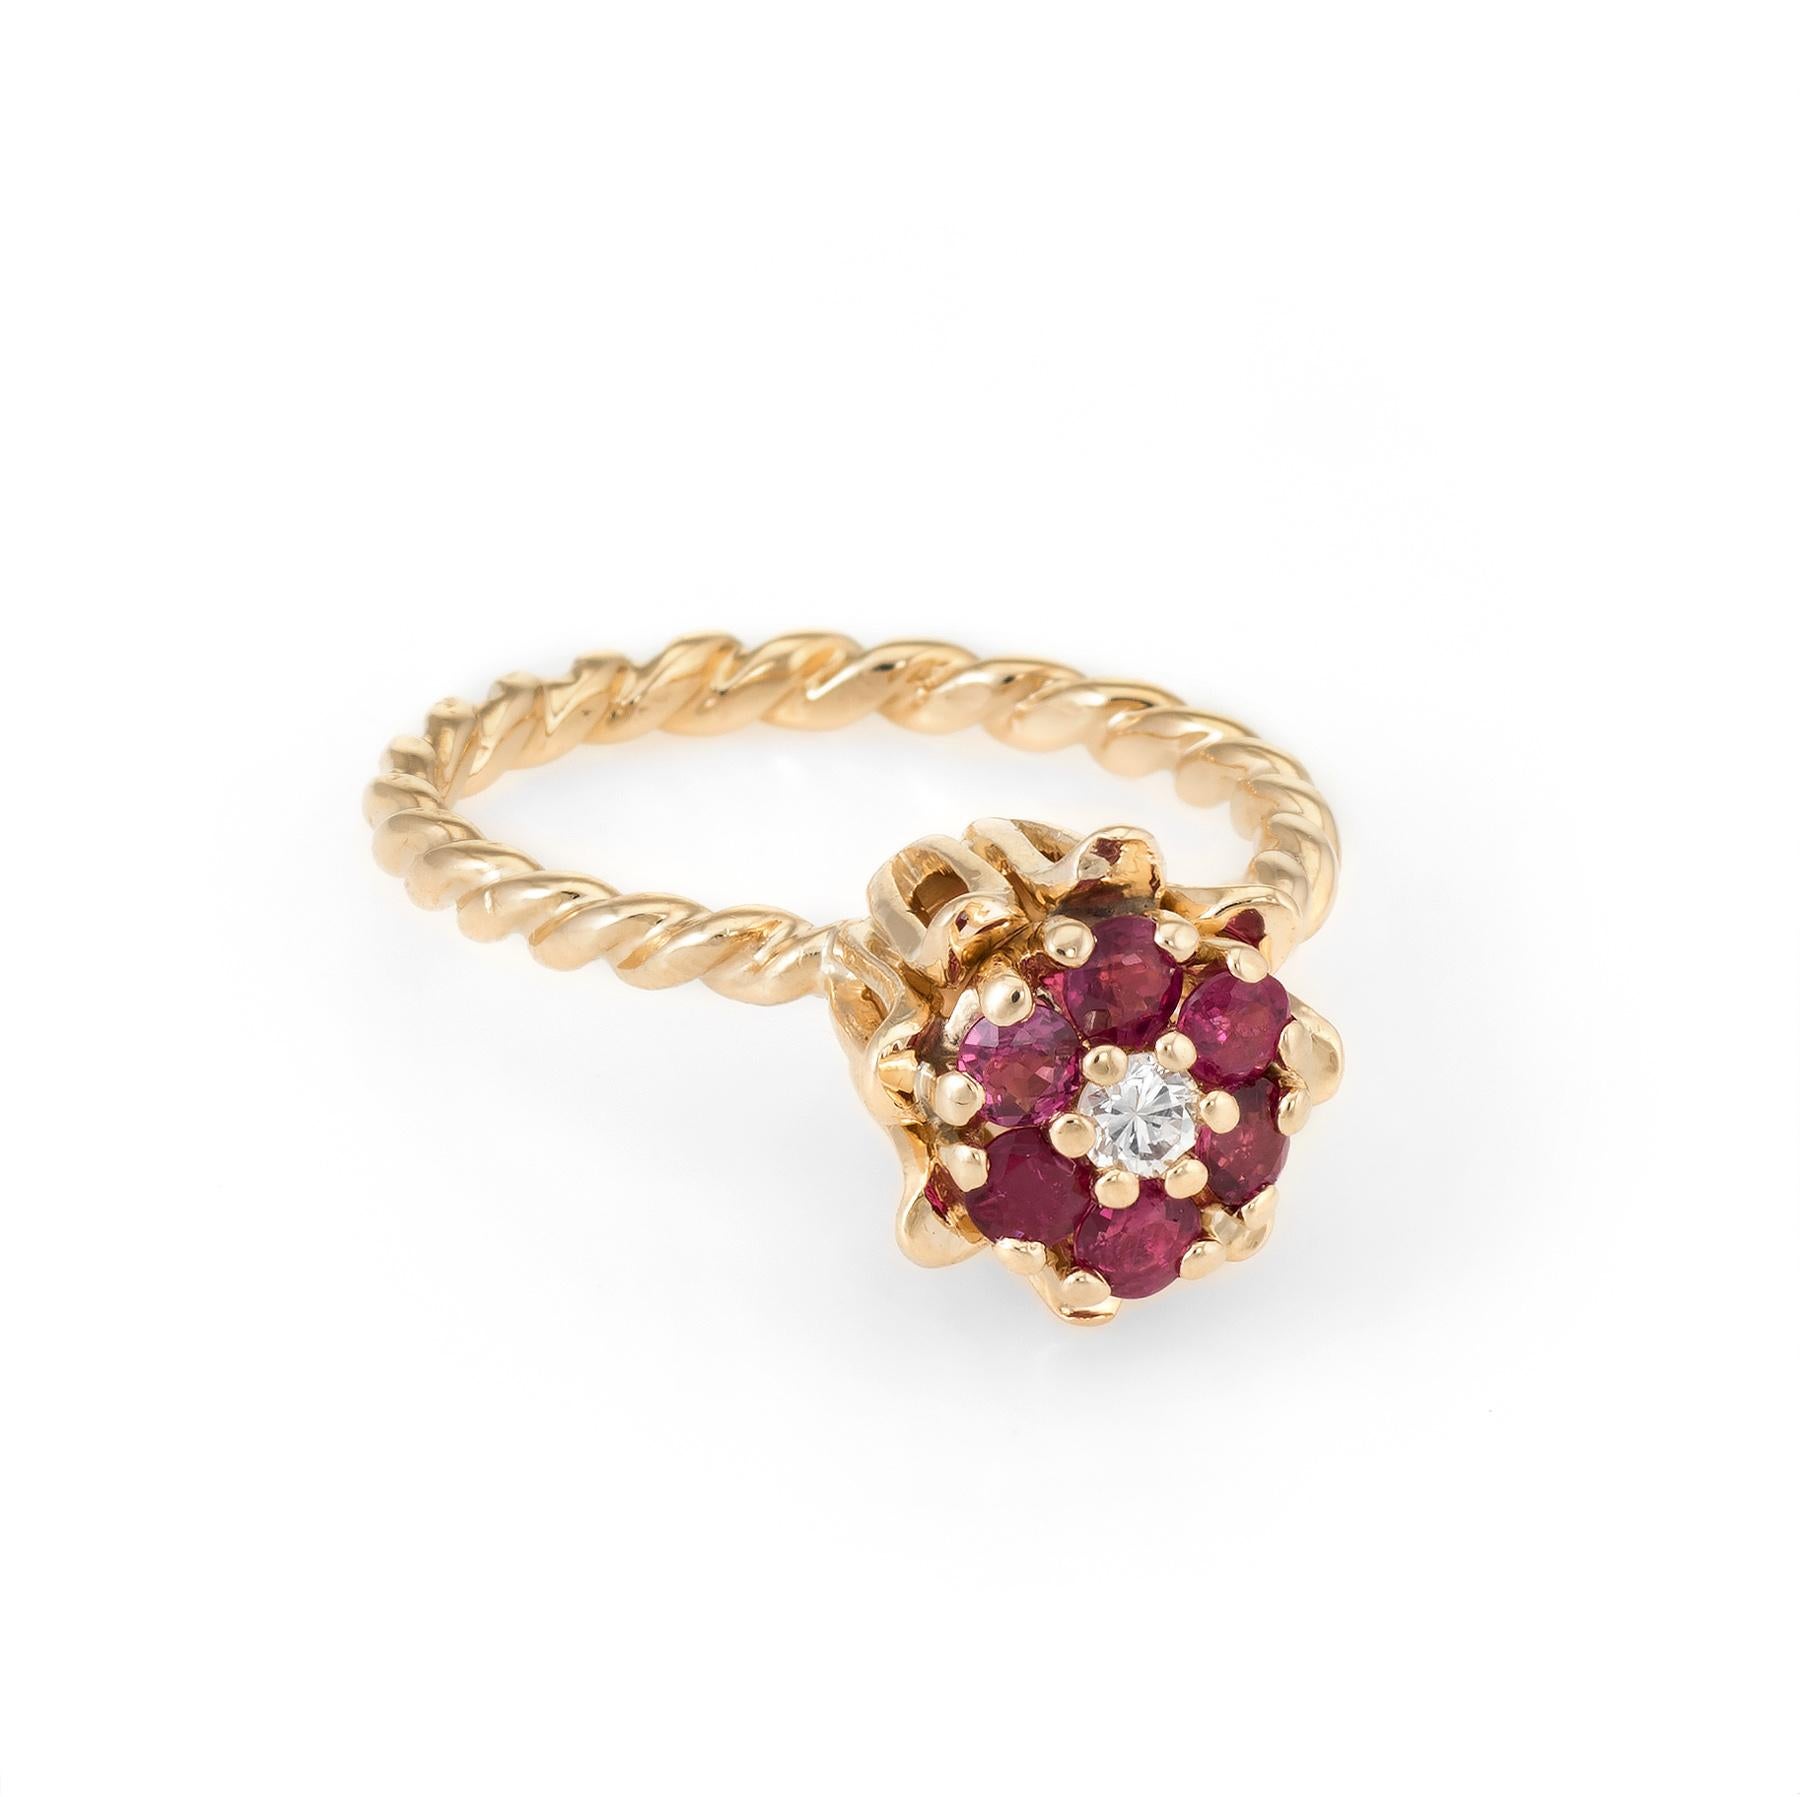 Finely detailed tulip stacking ring, crafted in 14 karat yellow gold. 

Rubies total an estimated 0.30 carats, accented with an estimated 0.05 carat round brilliant cut diamond (estimated at G-H color and VS clarity). The rubies are in excellent